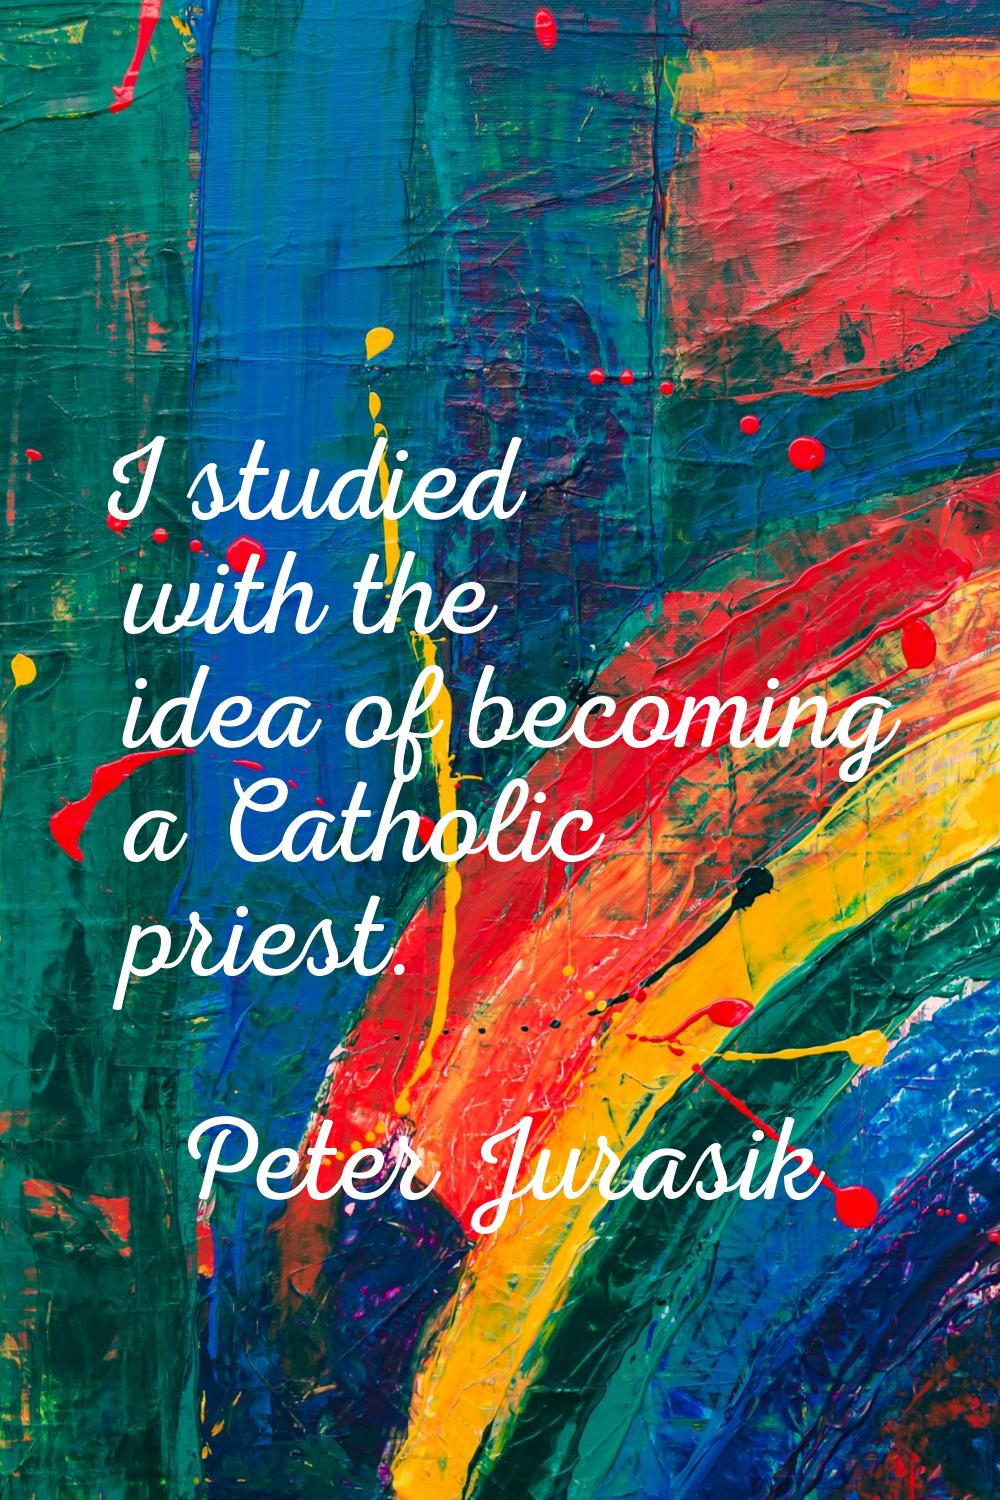 I studied with the idea of becoming a Catholic priest.